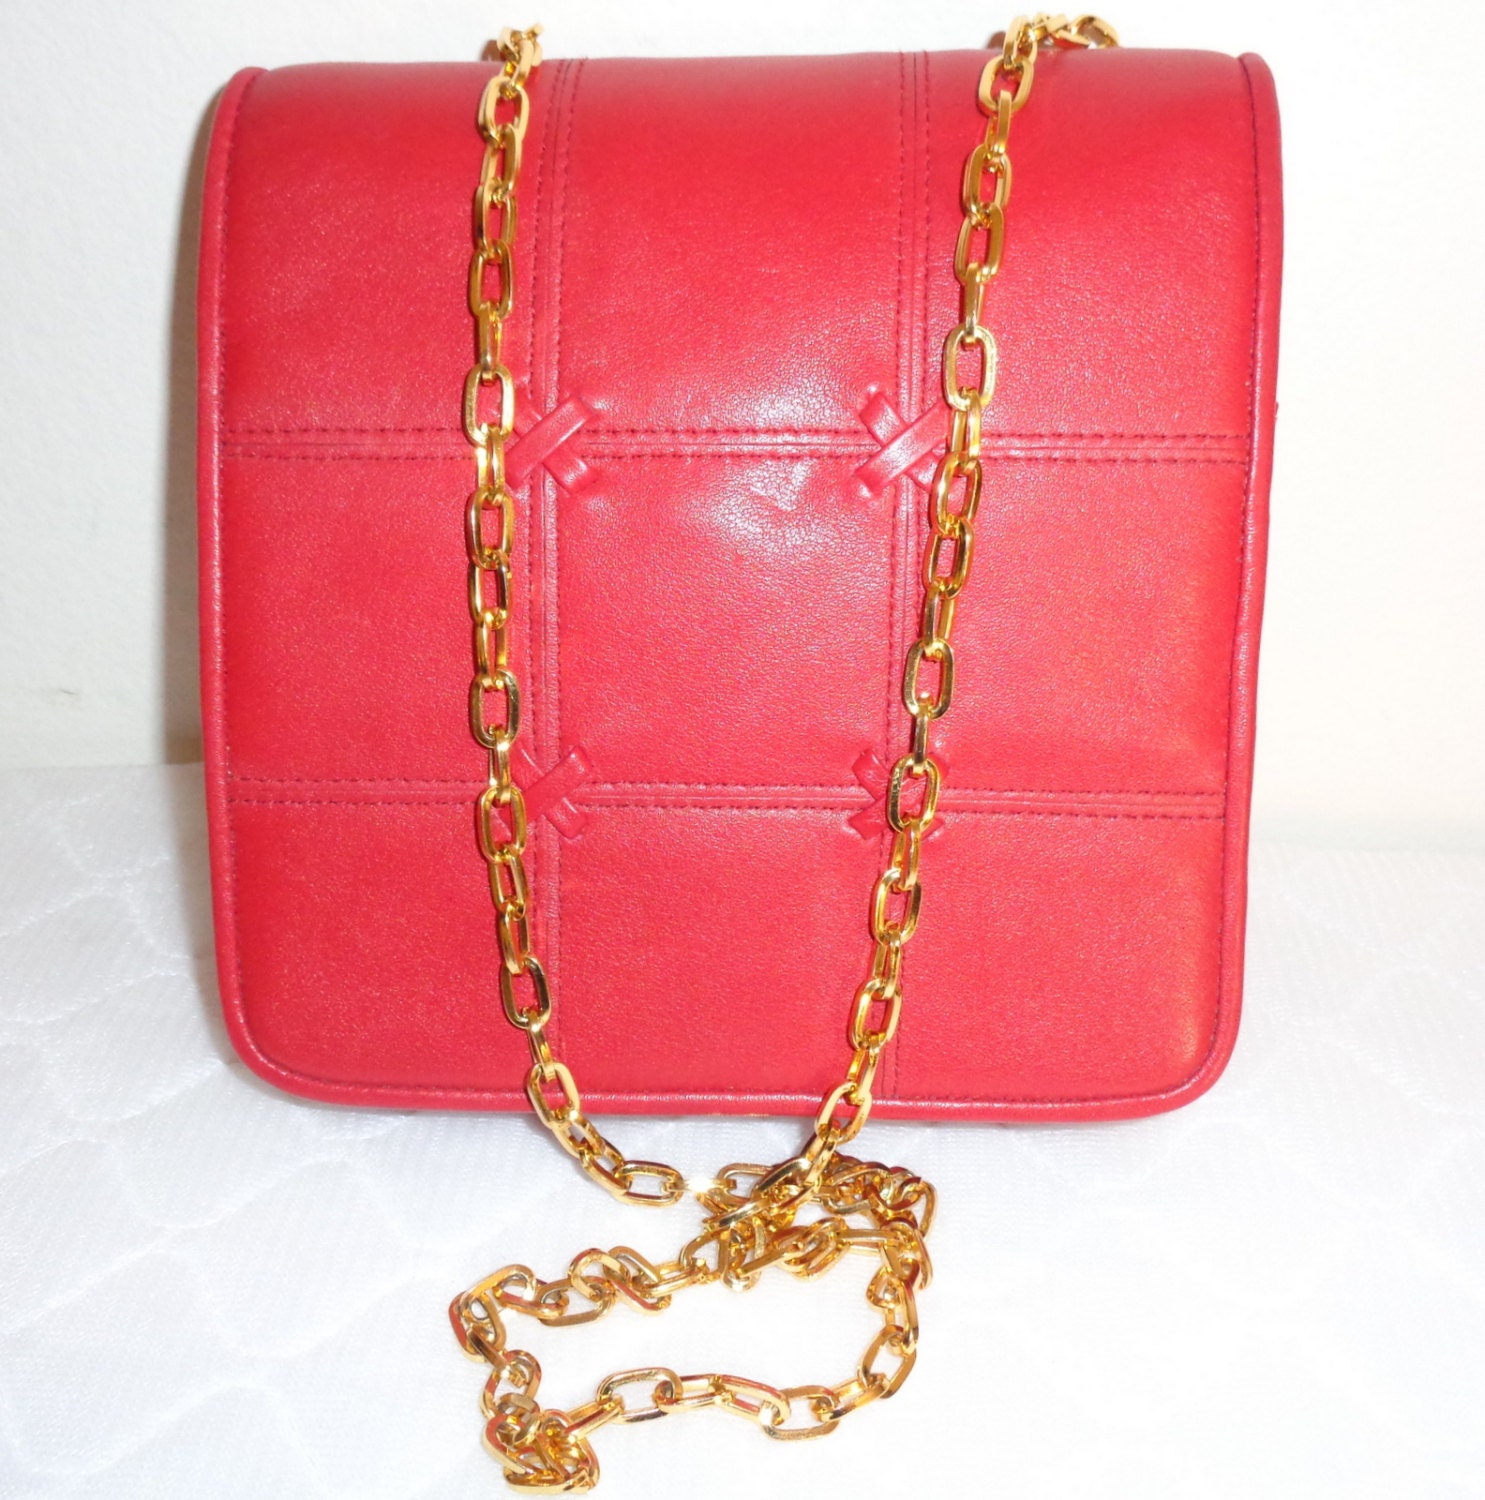 Lord and Taylor fancy satchel purse cross body bag lipstick